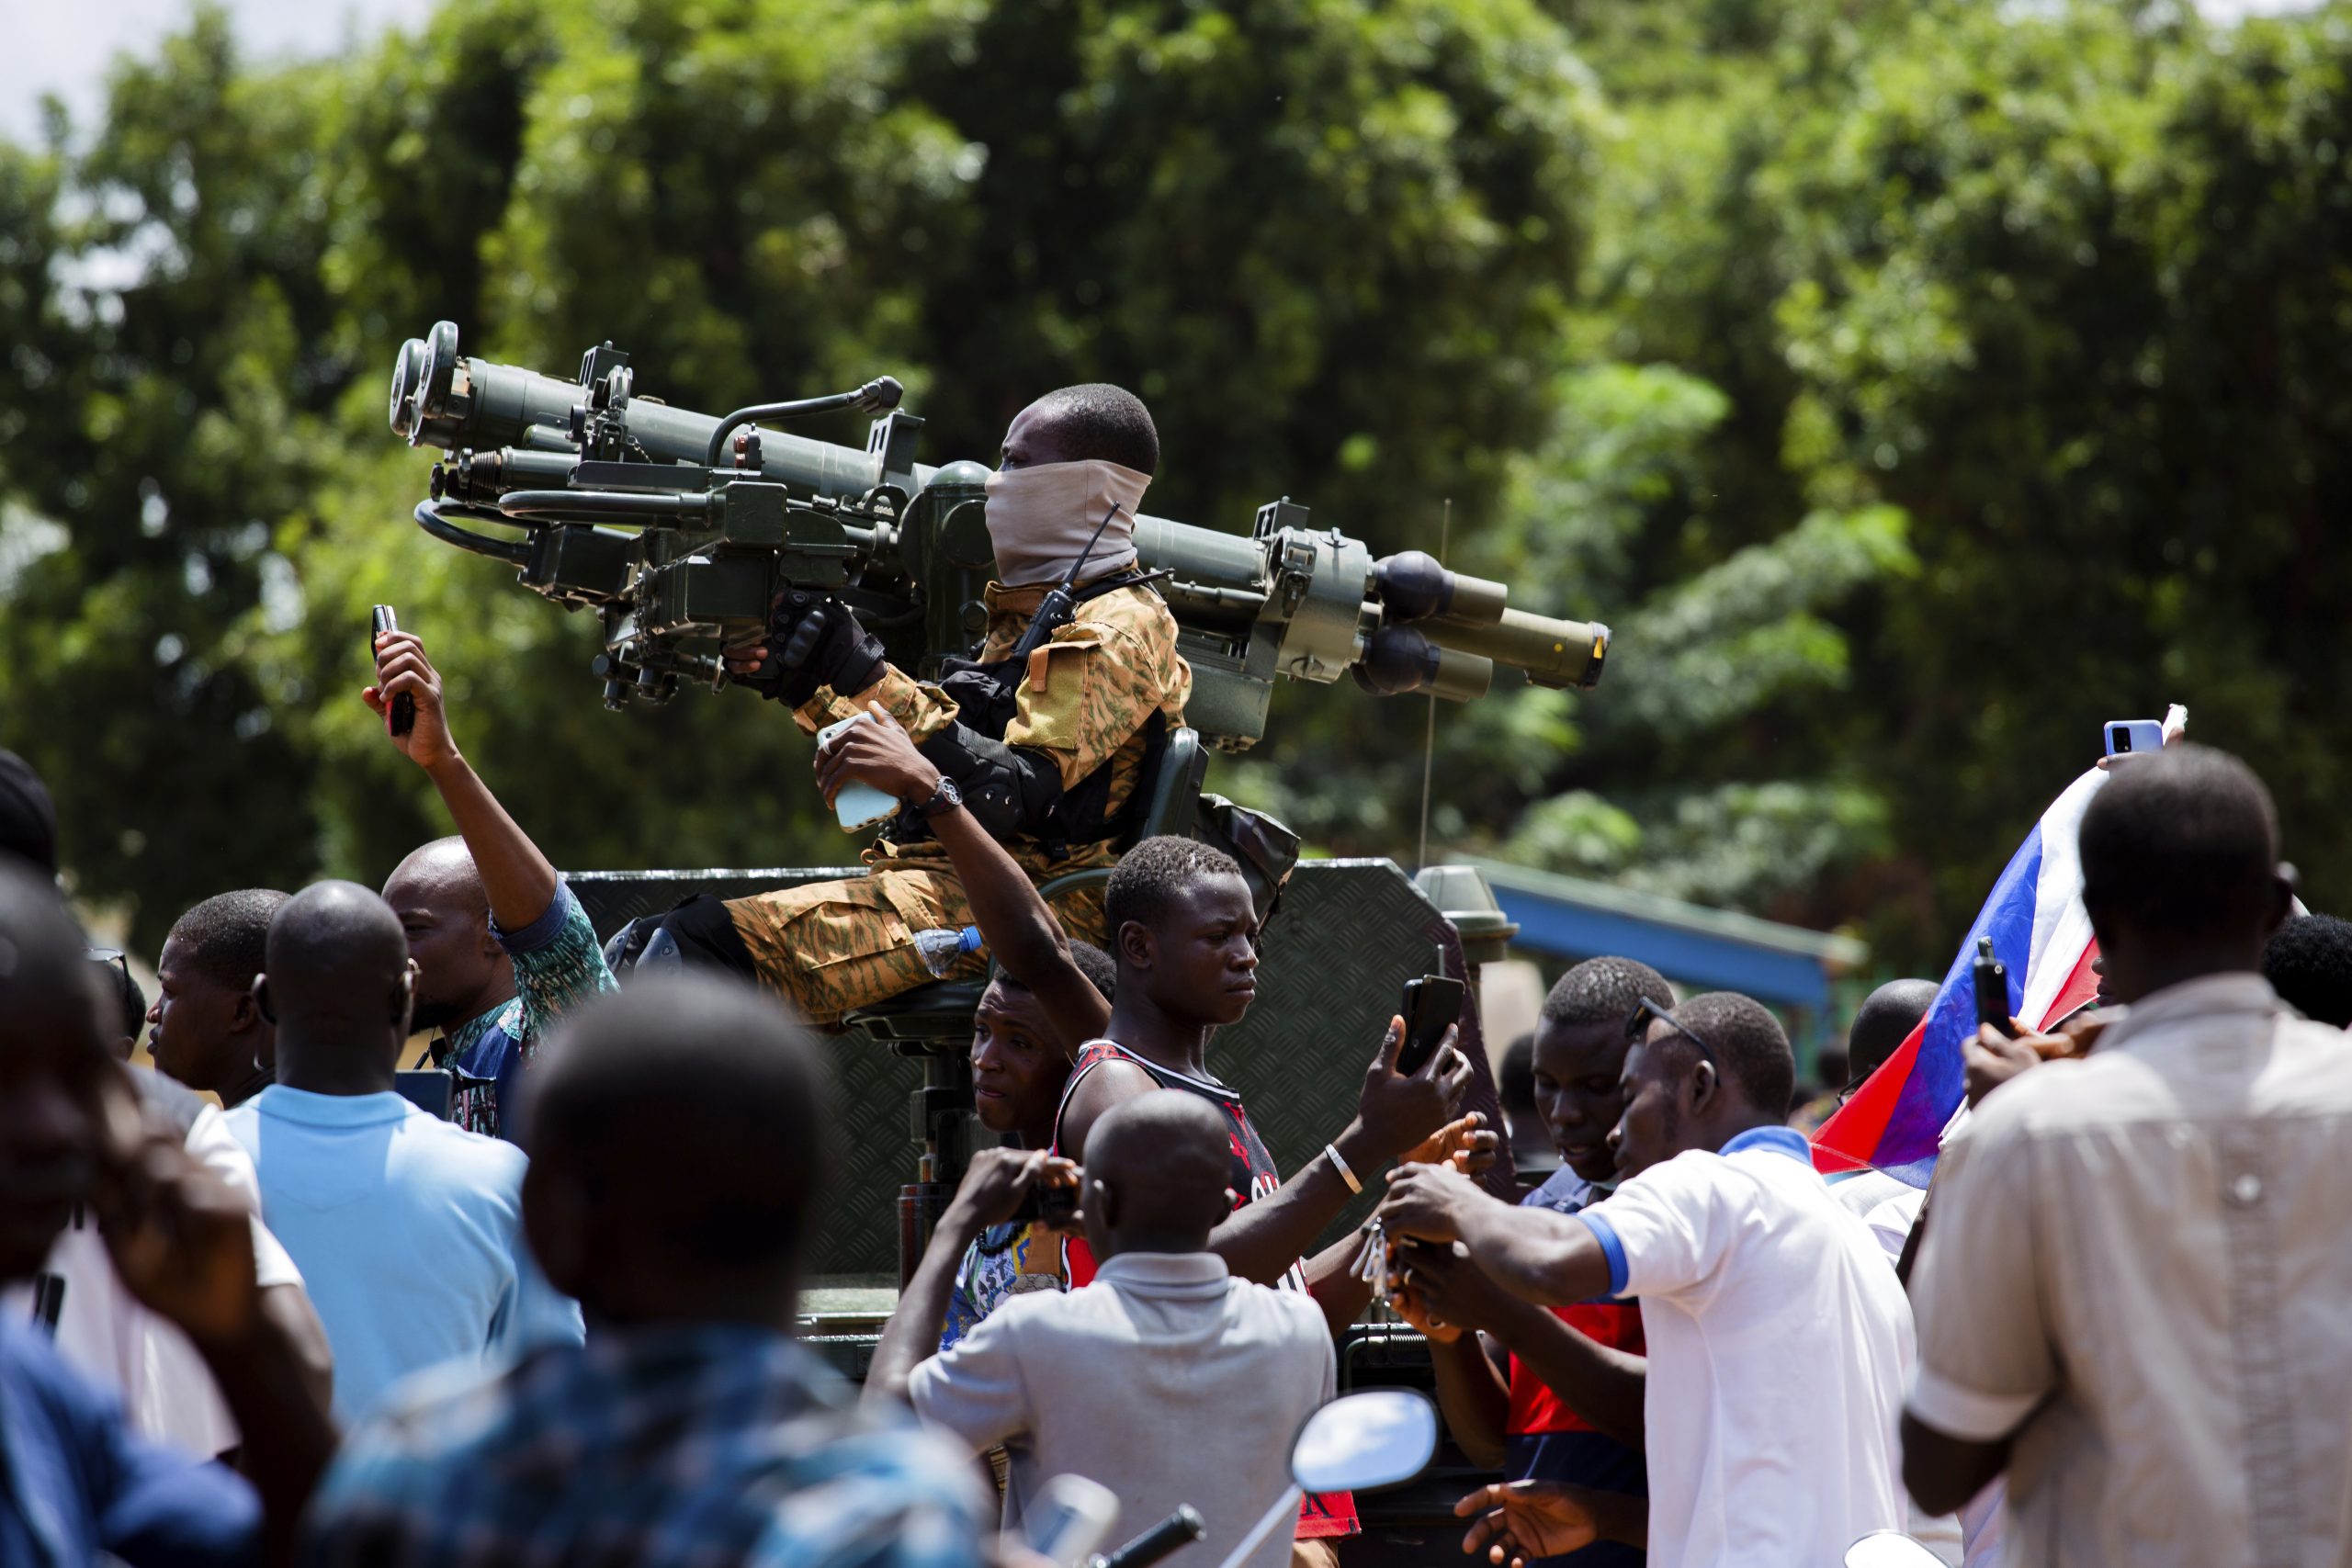 IntelBrief: Burkina Faso Coup Signals Broader Fragility Throughout the Sahel